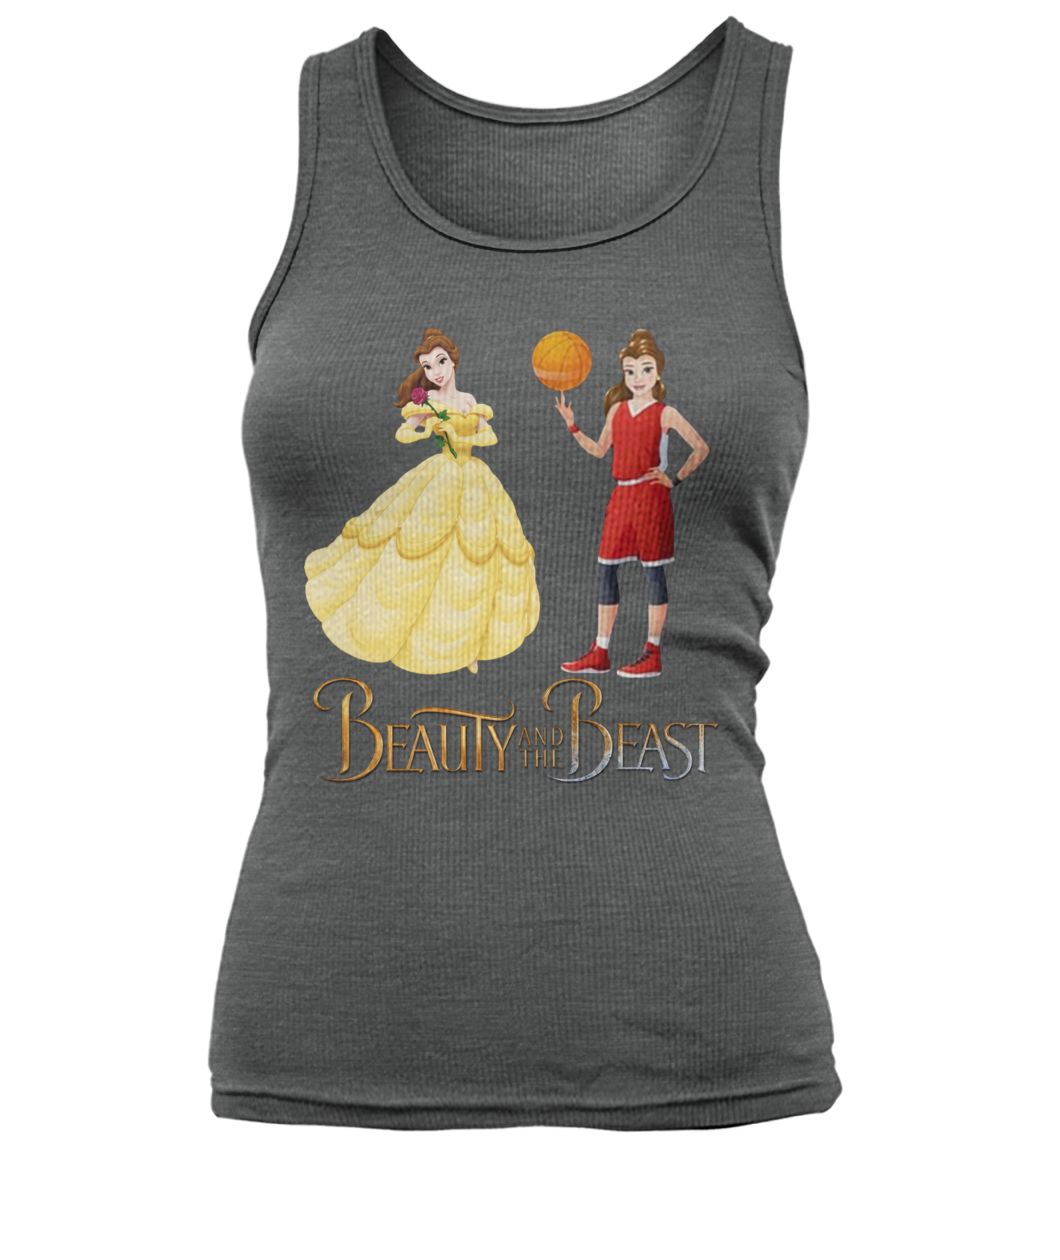 Beauty and the beast belle and basketball girl women's tank top